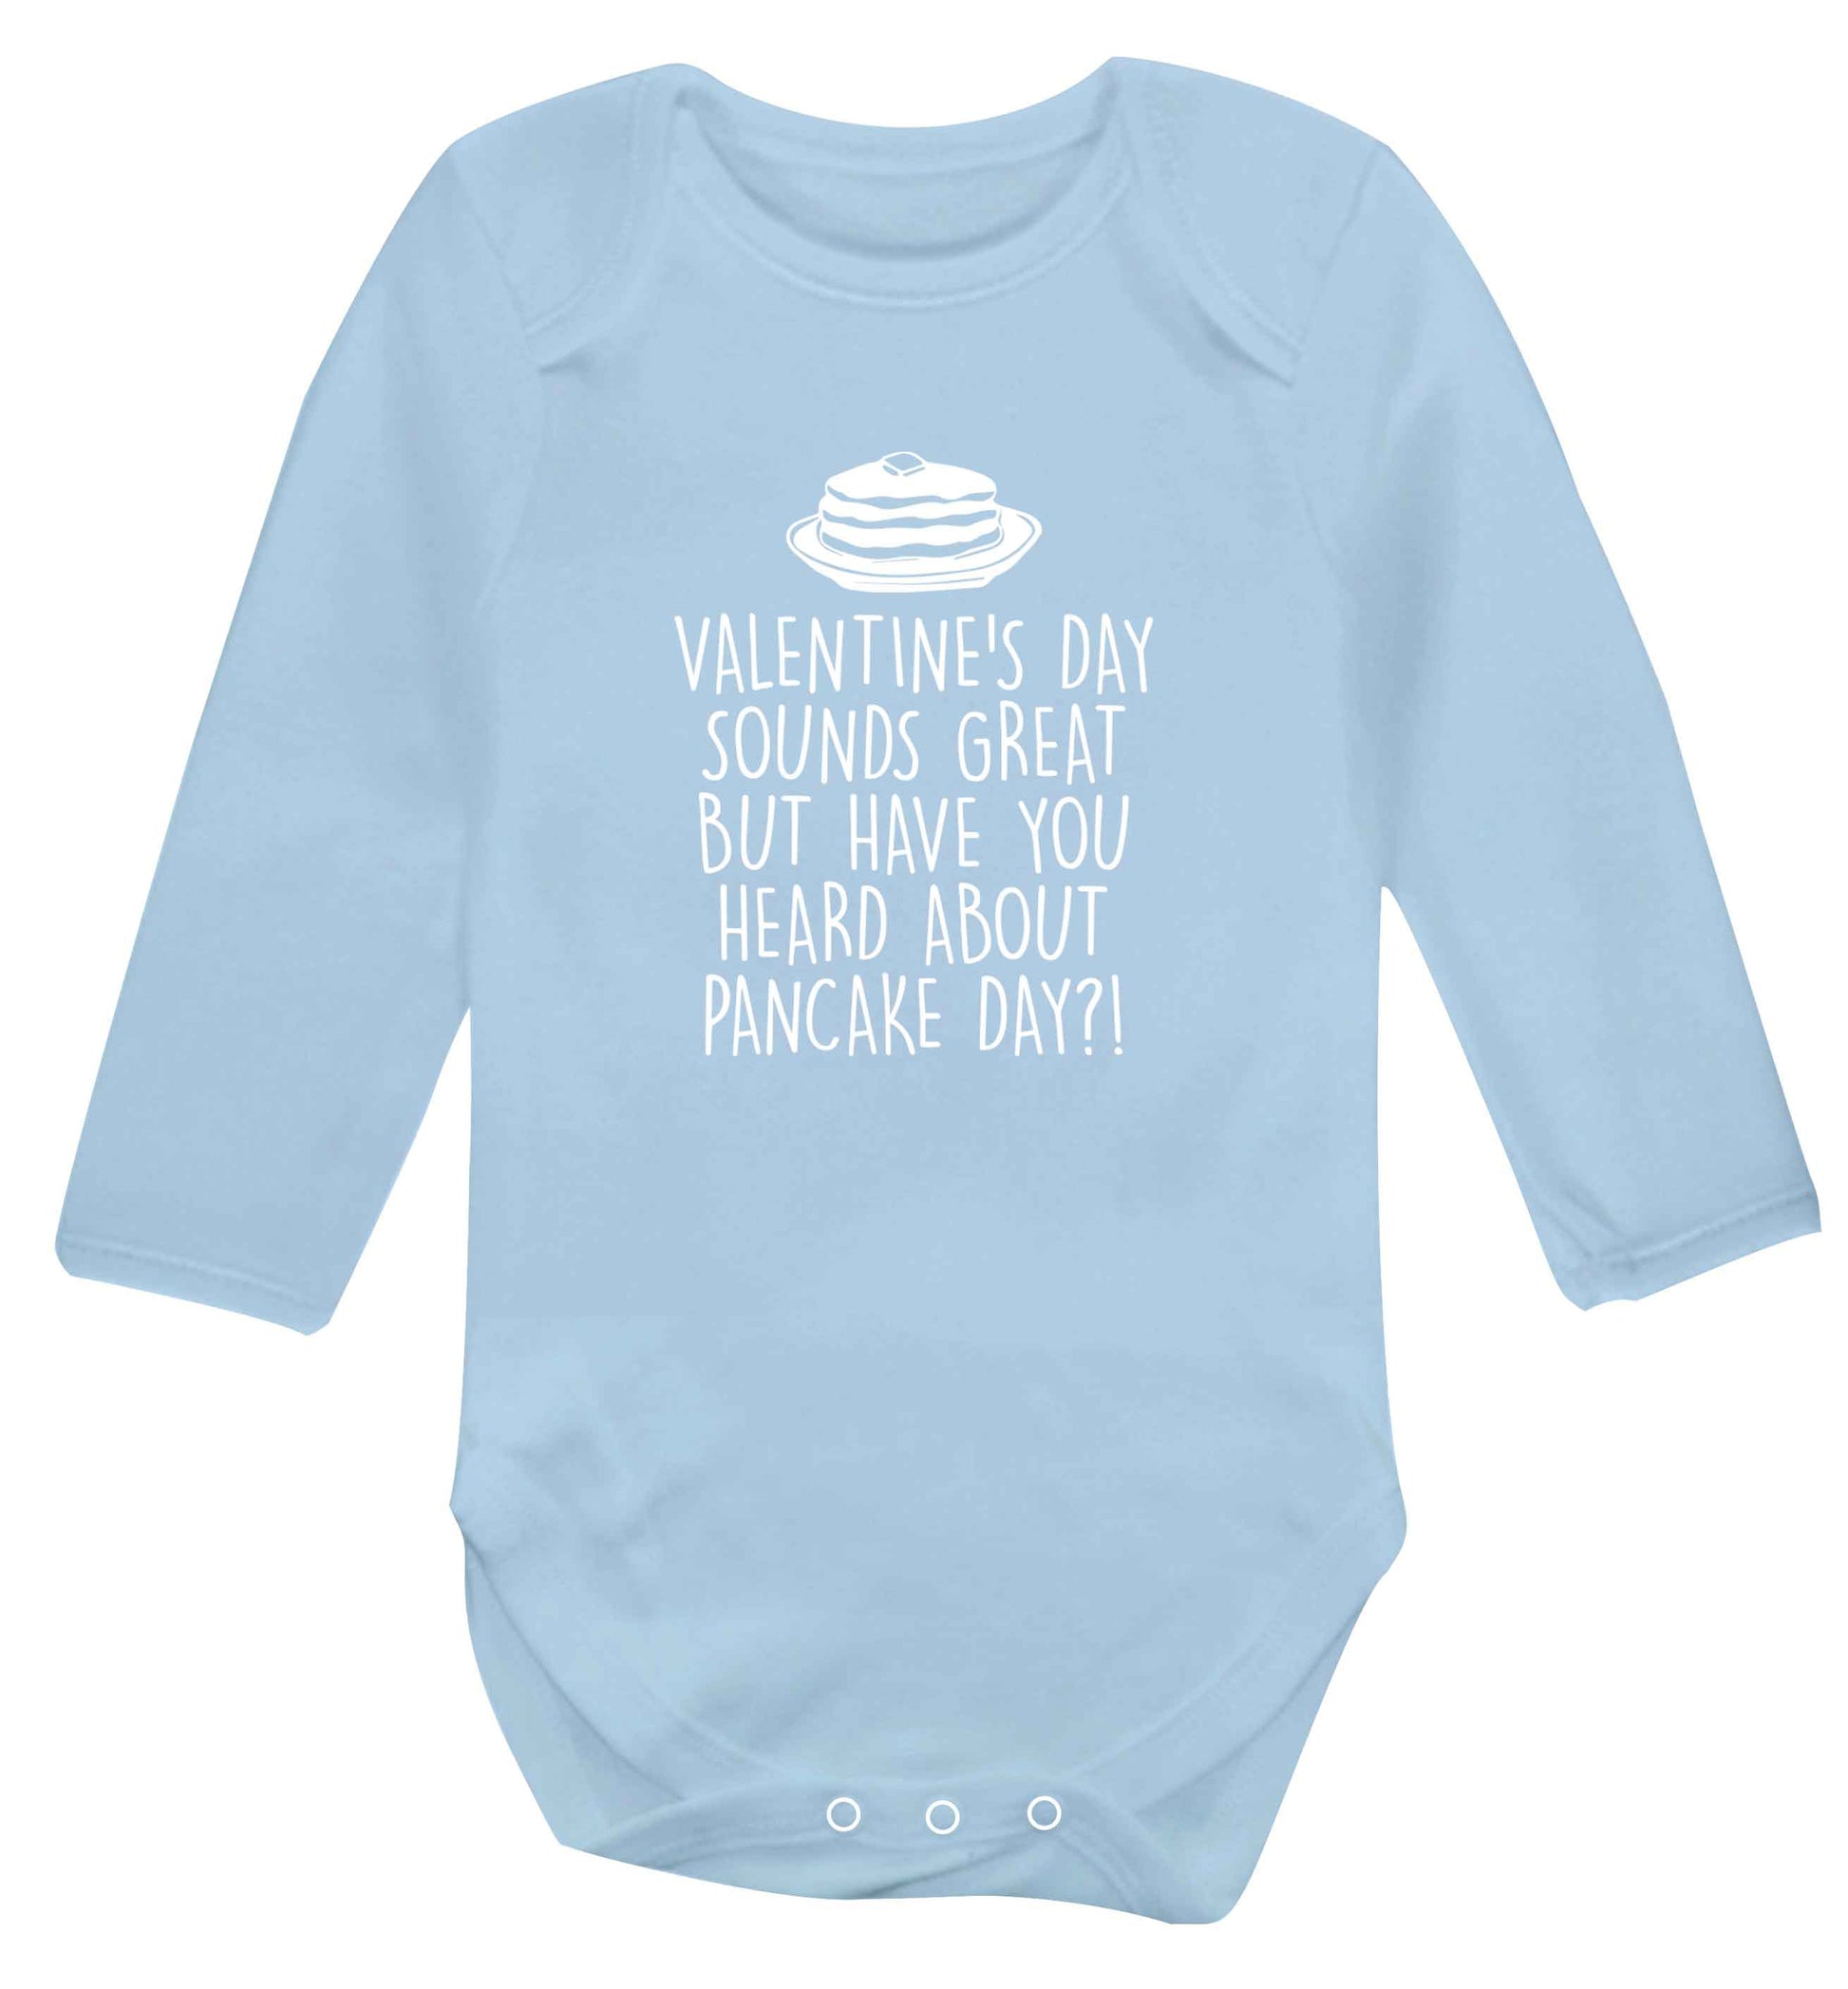 Valentine's day sounds great but have you heard about pancake day?! baby vest long sleeved pale blue 6-12 months